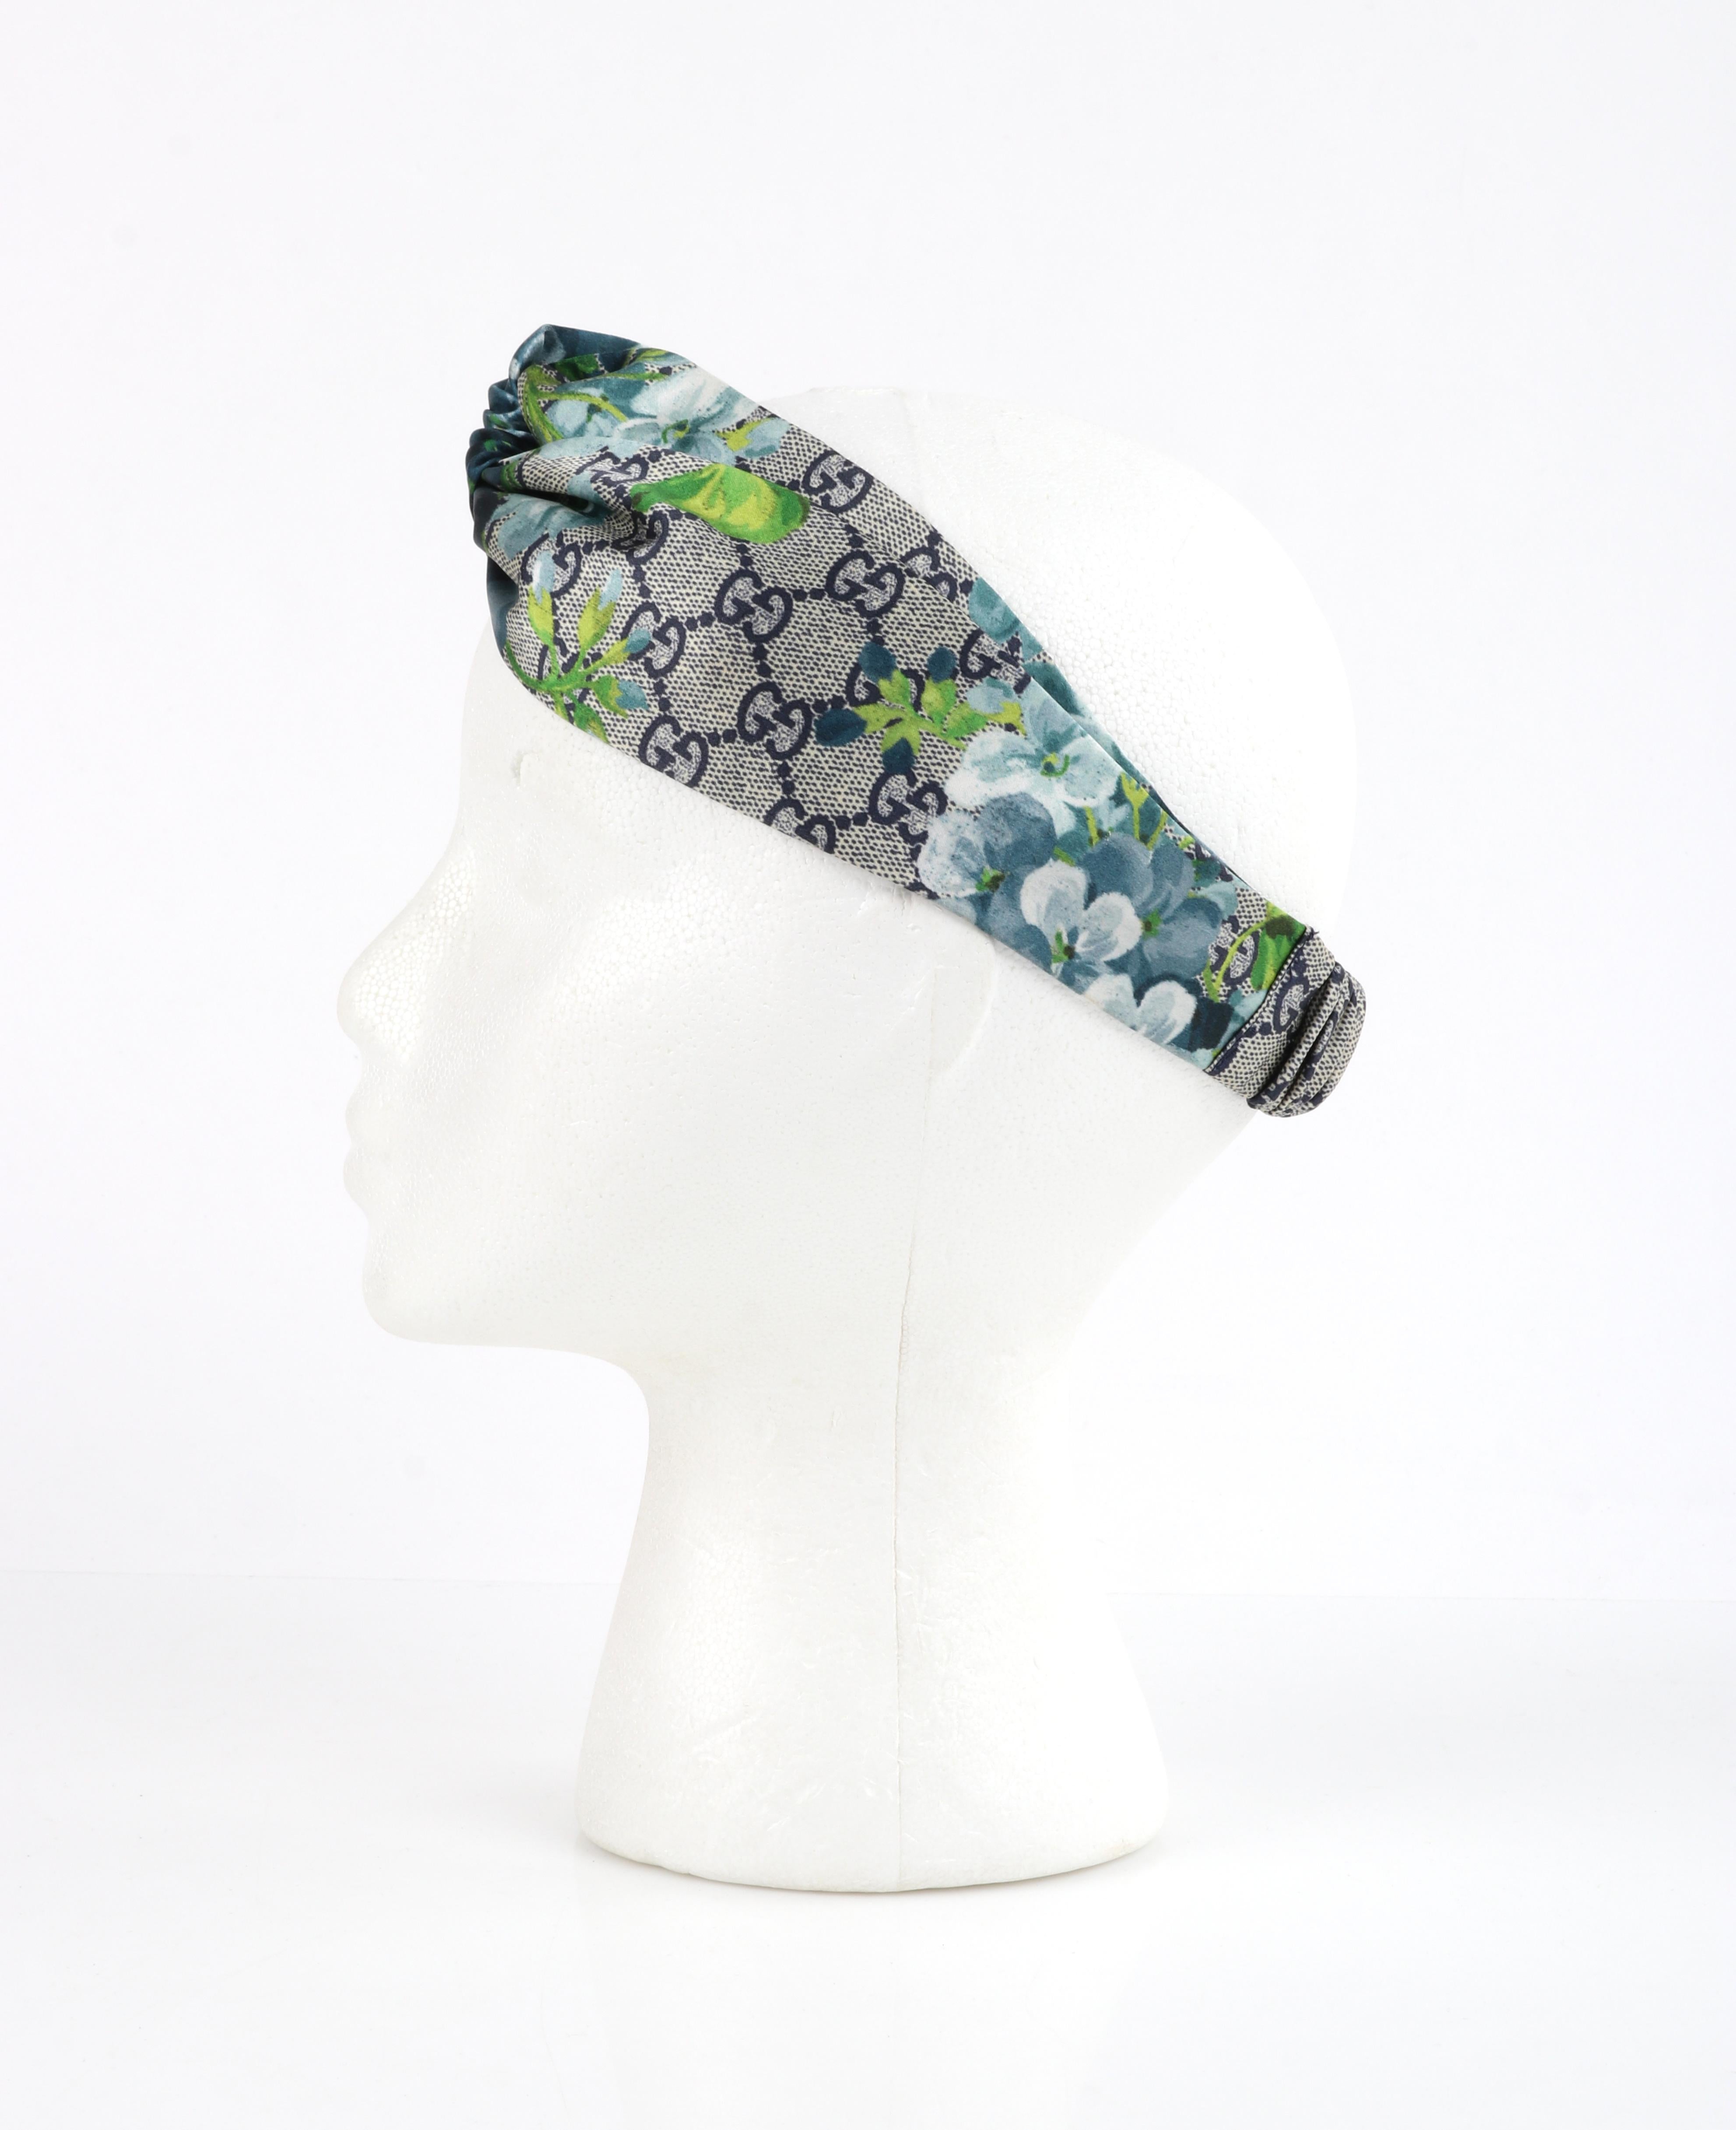 GUCCI c.2016 “Blooms” Blue Gray GG Monogram Floral Knotted Silk Headband NWT 2